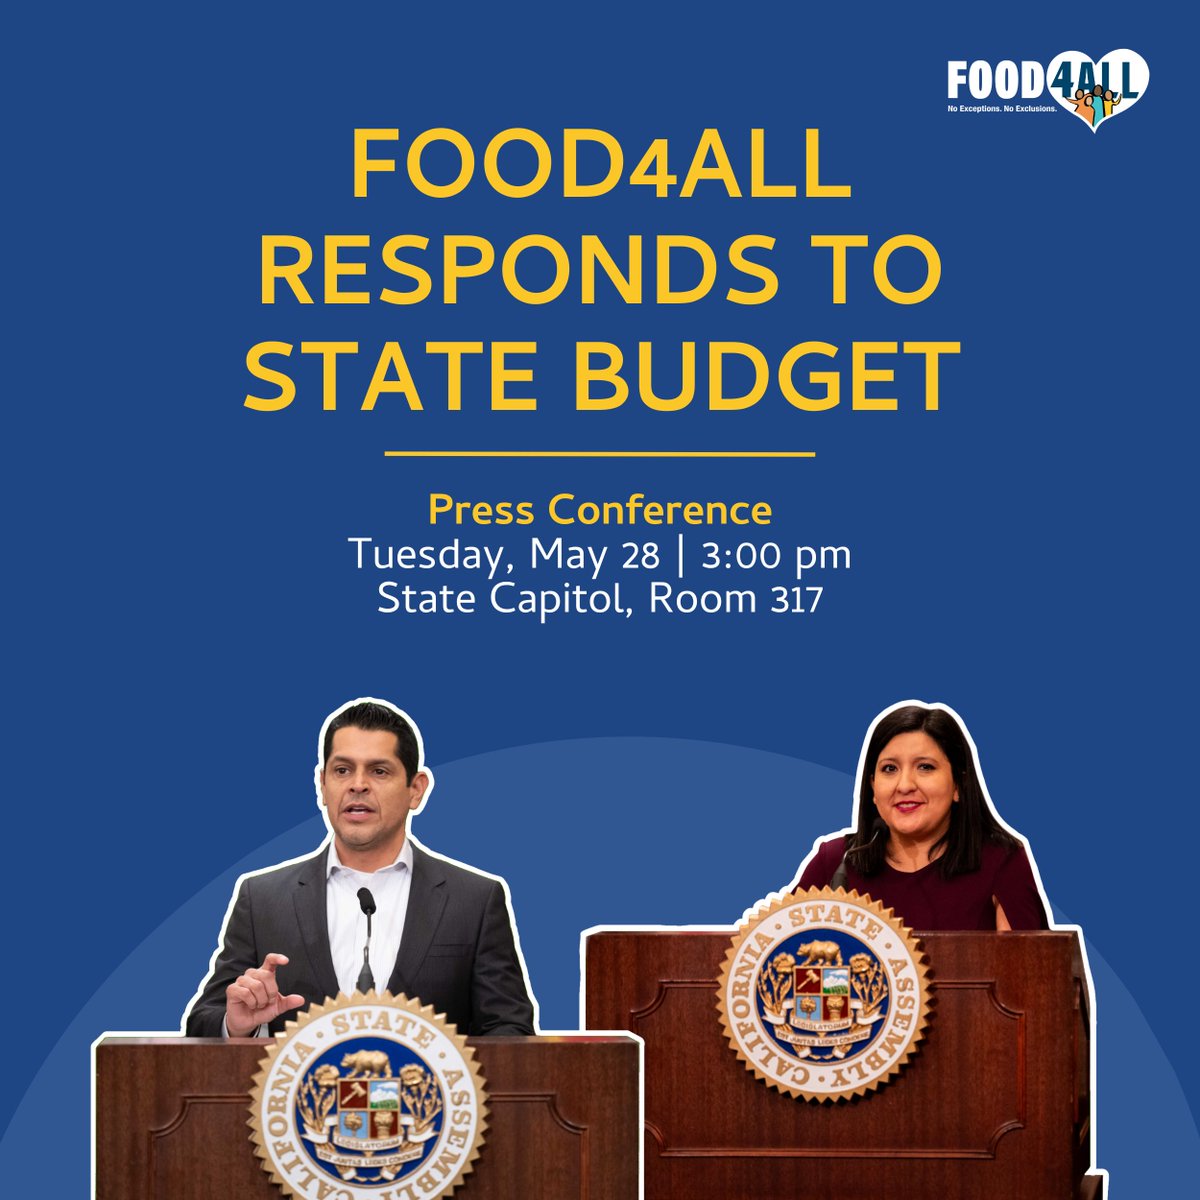 When we say #NoDelays, we mean NO DELAYS. @cagovernor must not postpone the expansion of CalFresh for ppl aged 55+, regardless of immigration status. Join .@senator_hurtado & .@msantiagoad54 at #Food4All’s press conference on 5/28 at the State Capitol.